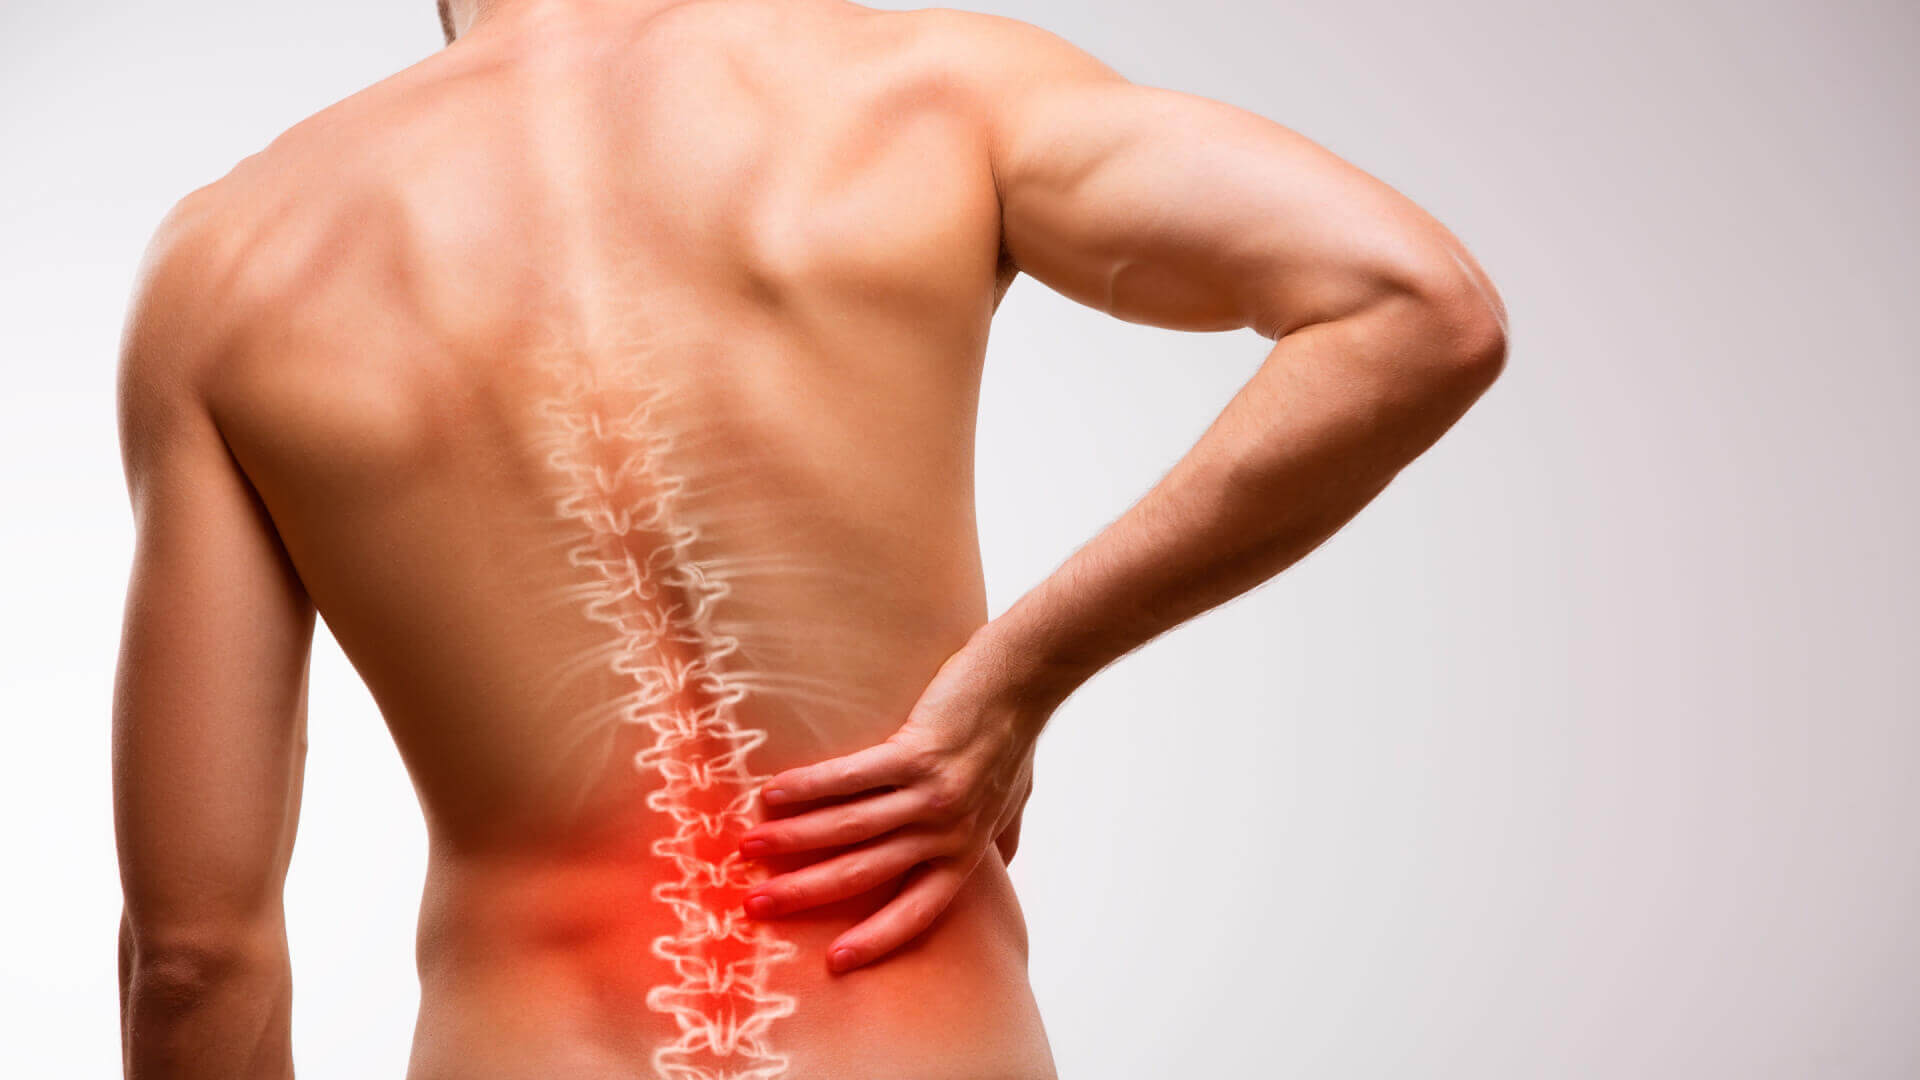 abdomen and back pain relief products